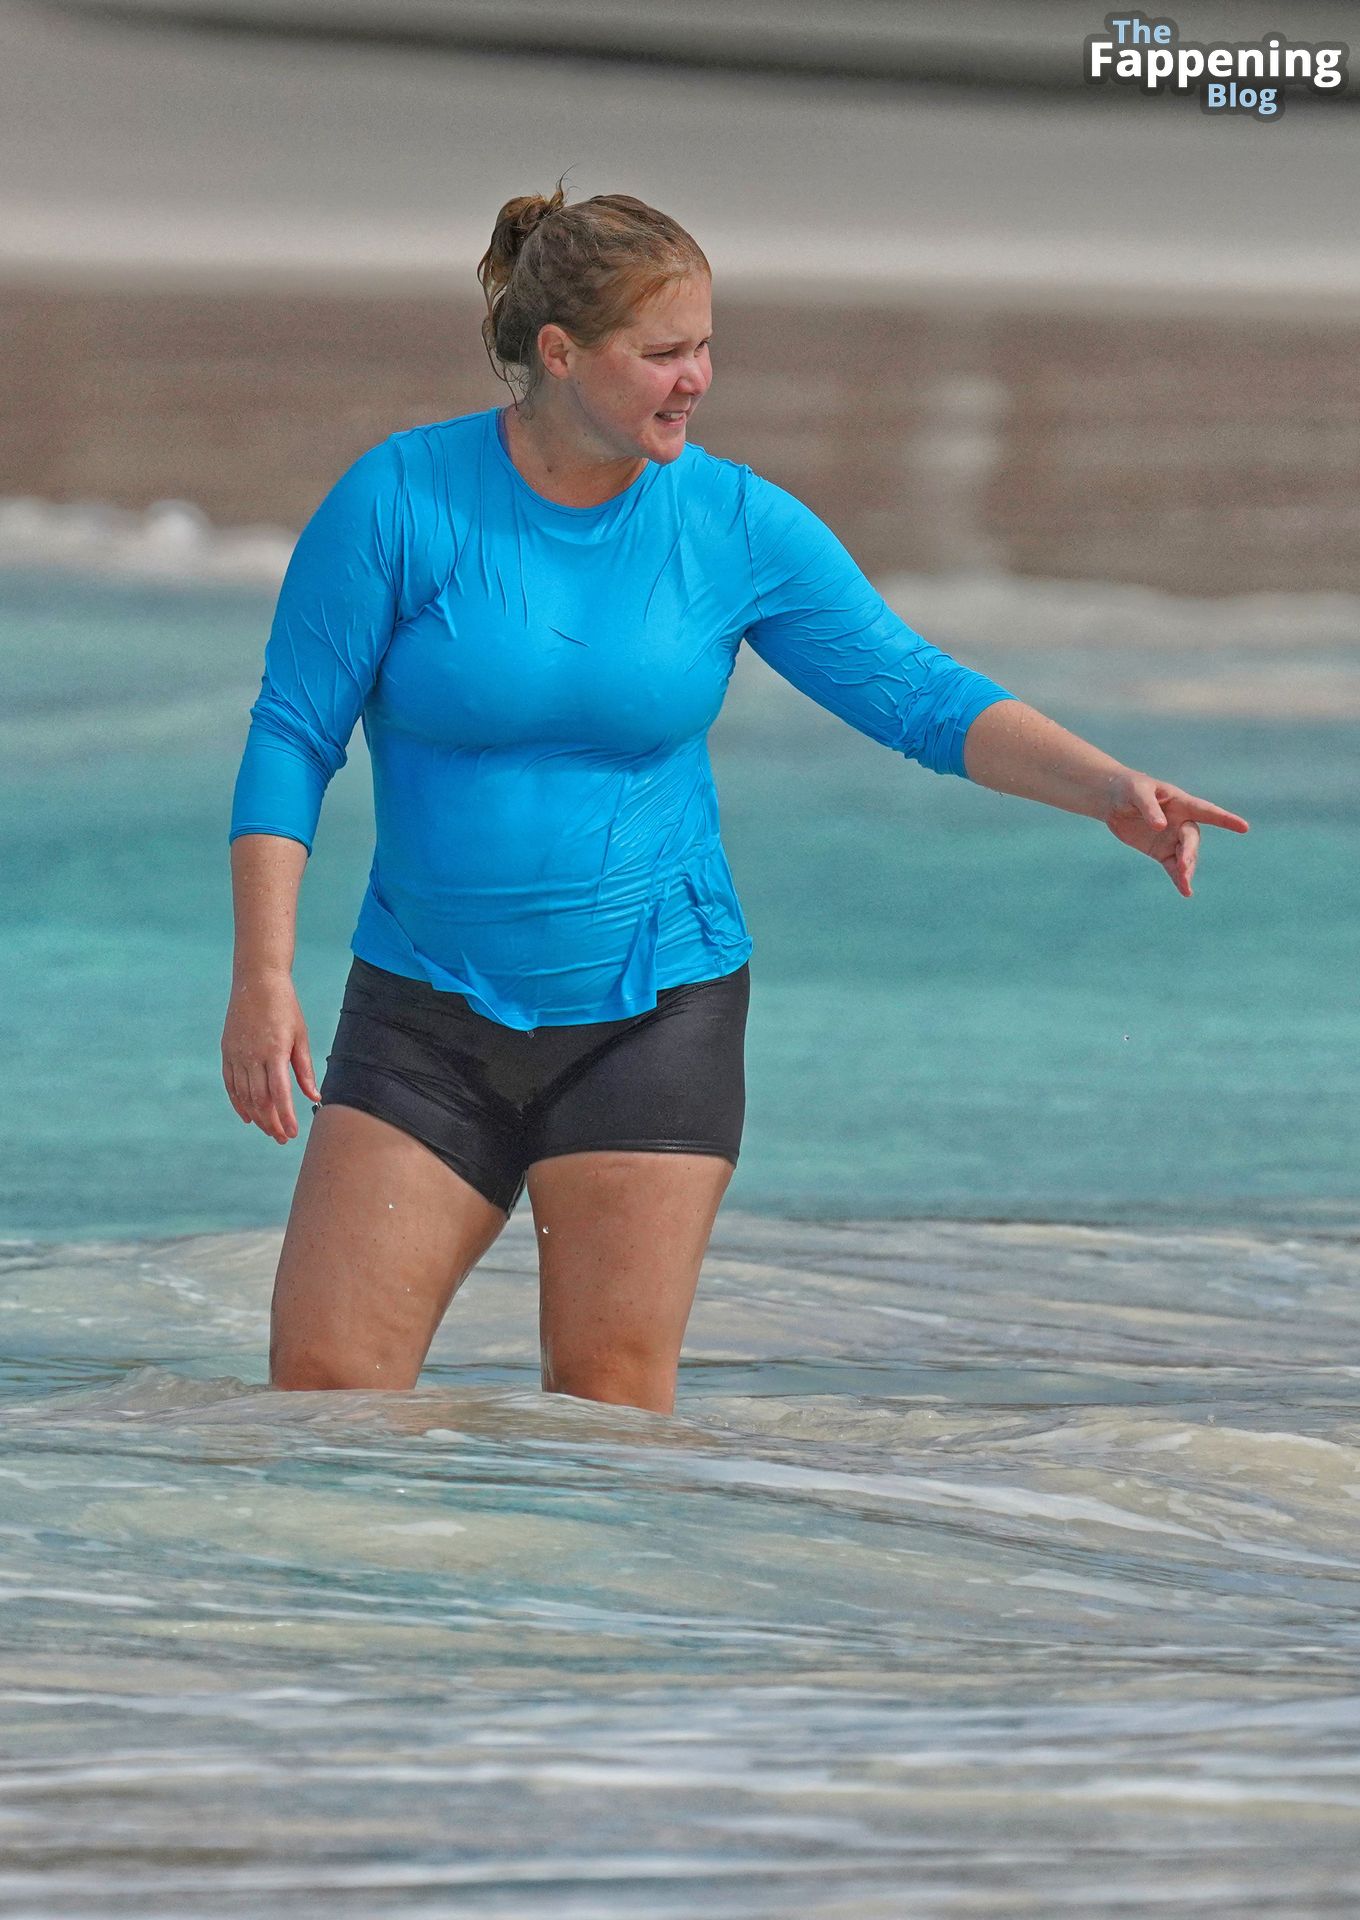 Amy-Schumer-Sexy-The-Fappening-Blog-21.jpg